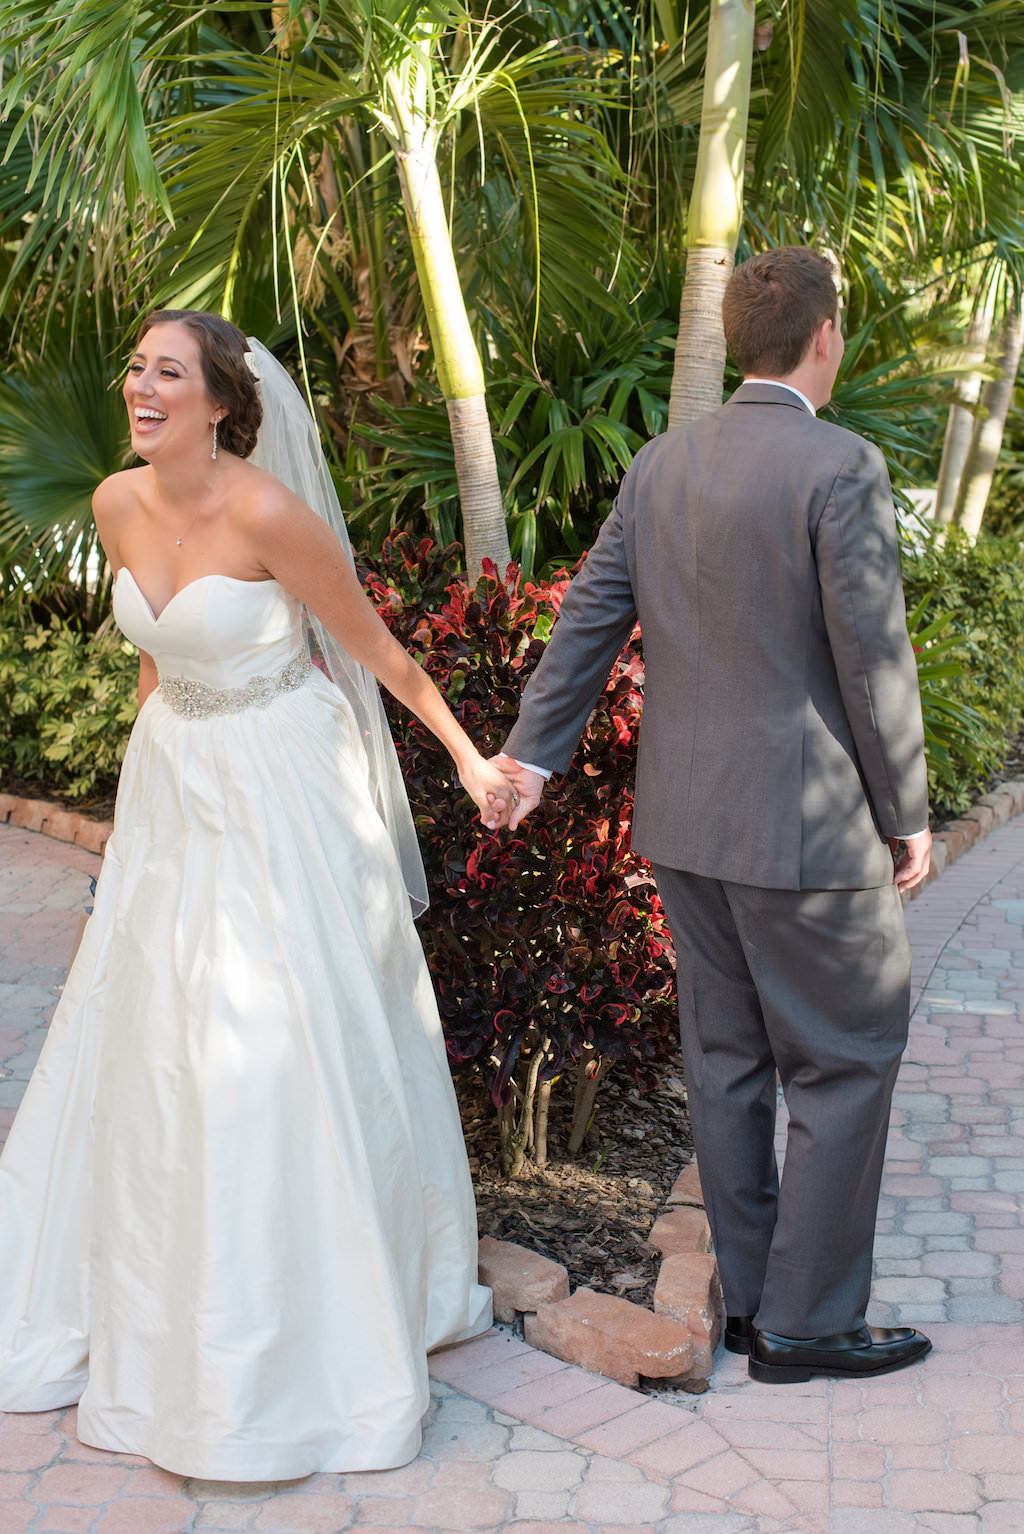 Outdoor First Look Portrait, Bride wearing Sweetheart A Line Silver Belted Wedding Dress | St. Pete Beach Wedding Photography Caroline & Evan Photography